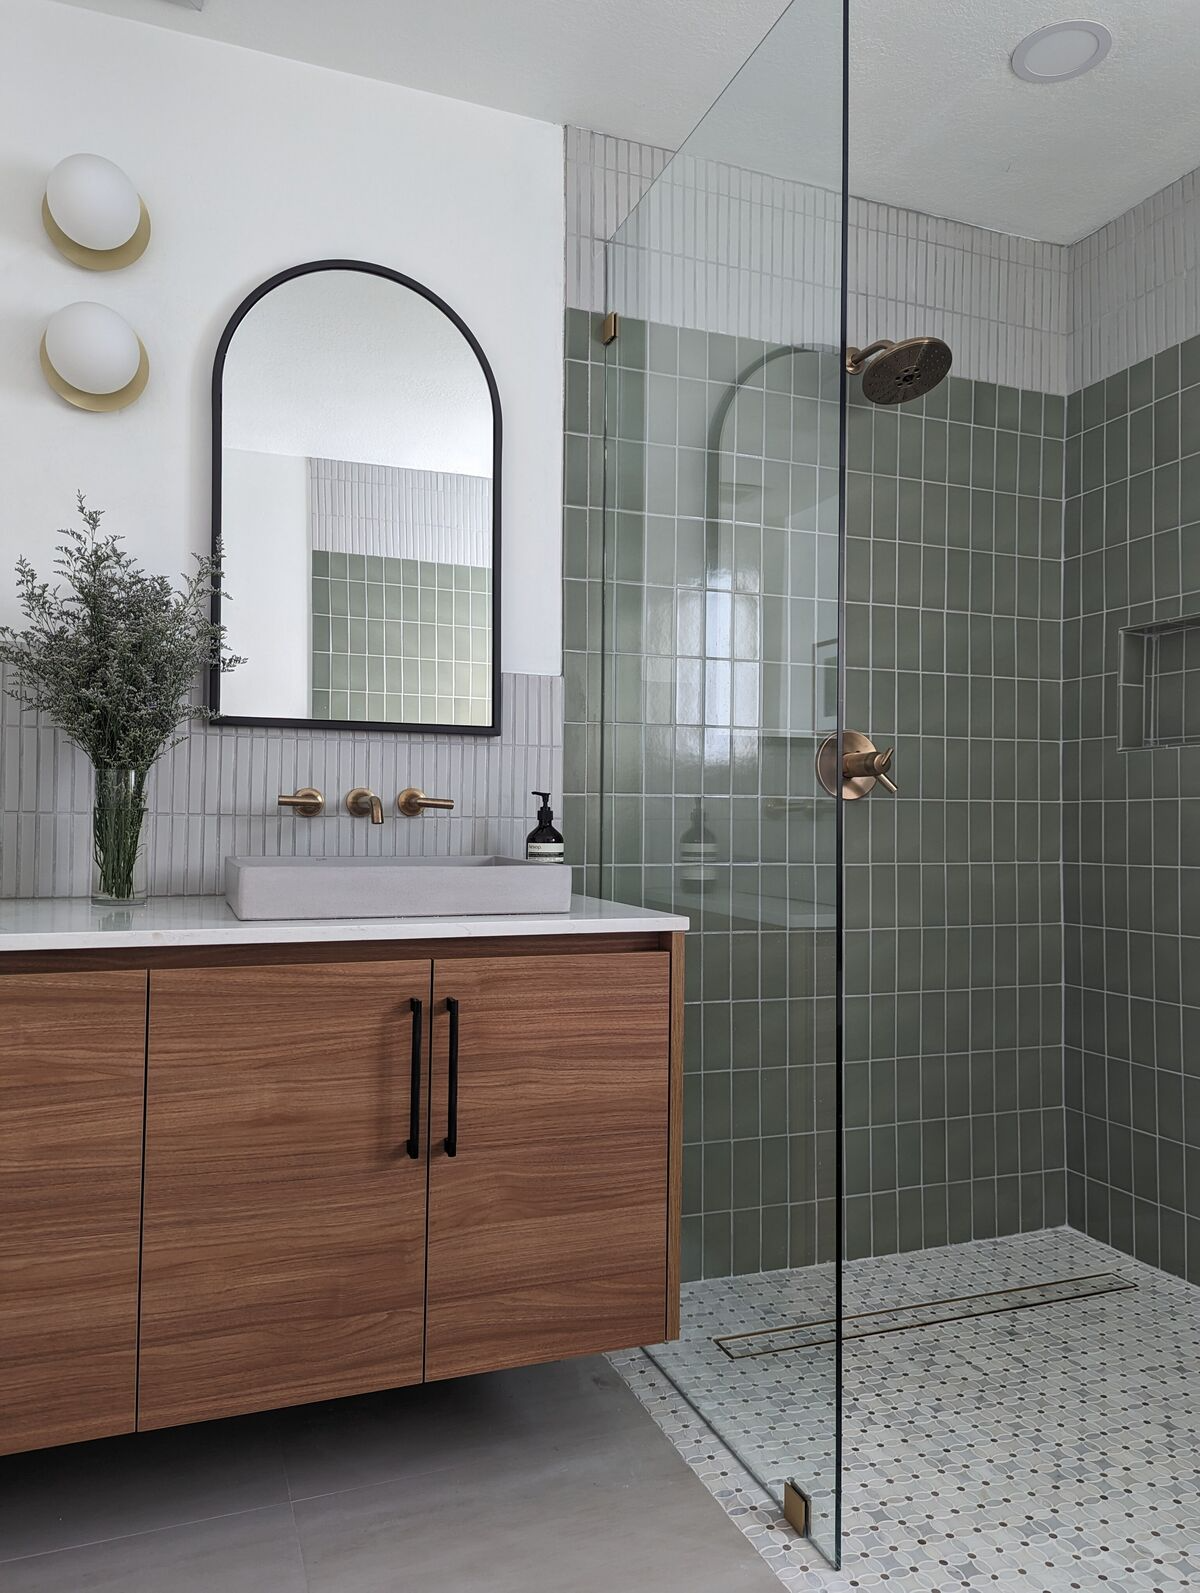 Bathroom Tiles Design: Transforming Your Space with Stylish Tiles